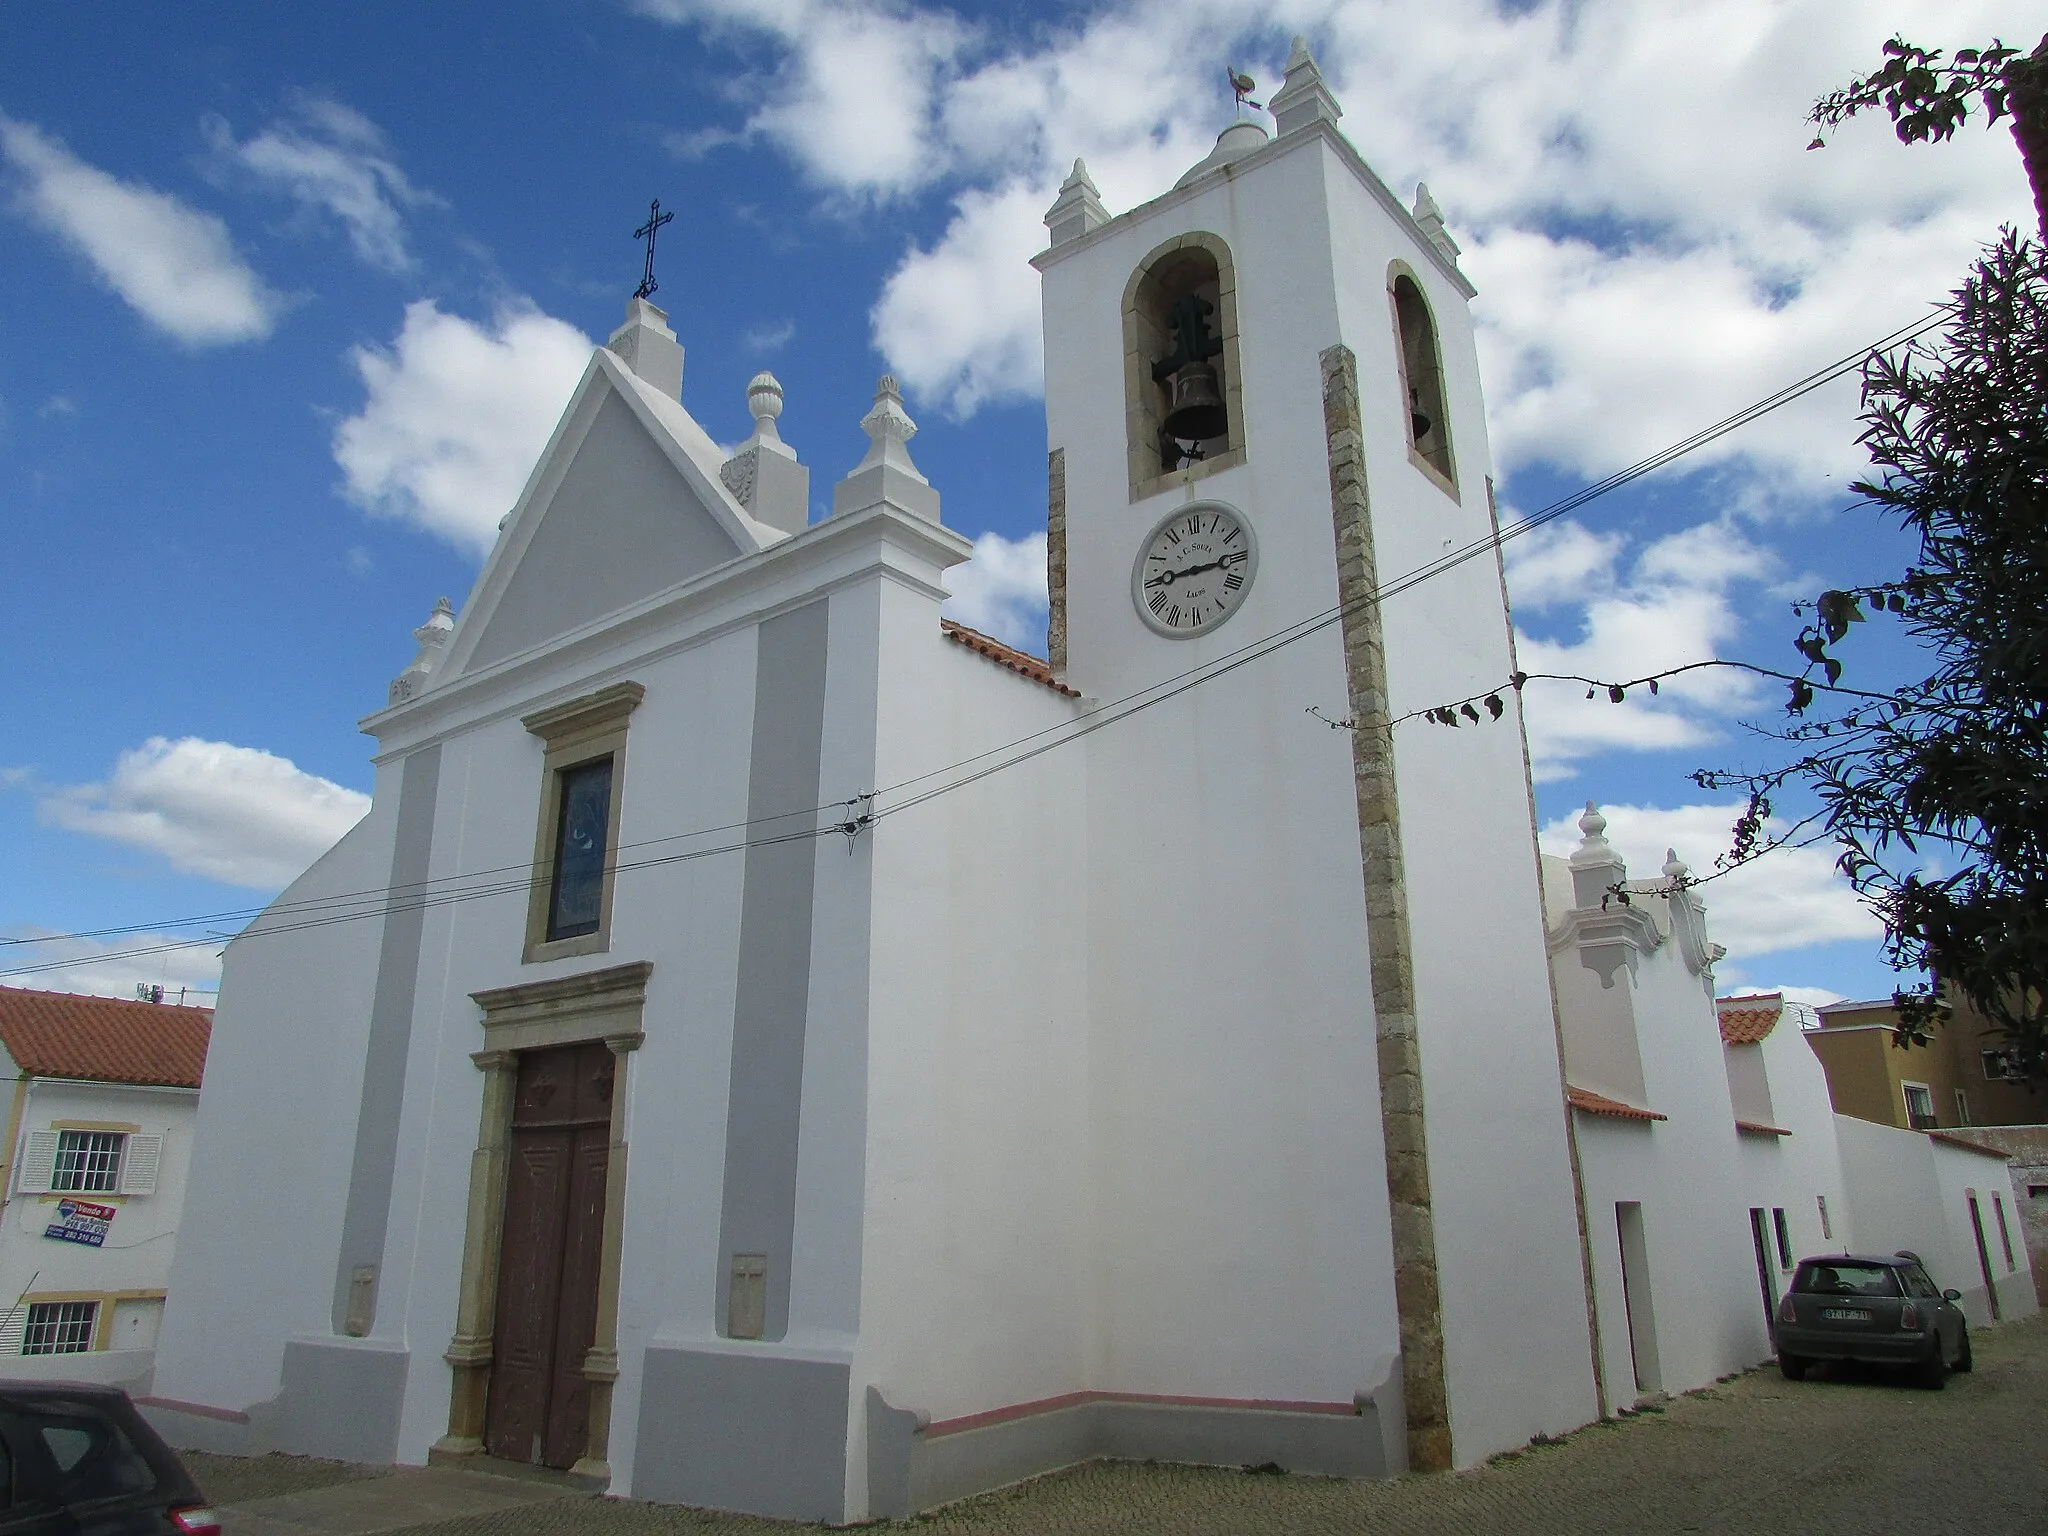 Photo showing: The south west corner of Algoz main Parish church located in the town of Algoz, Algarve, Portugal.